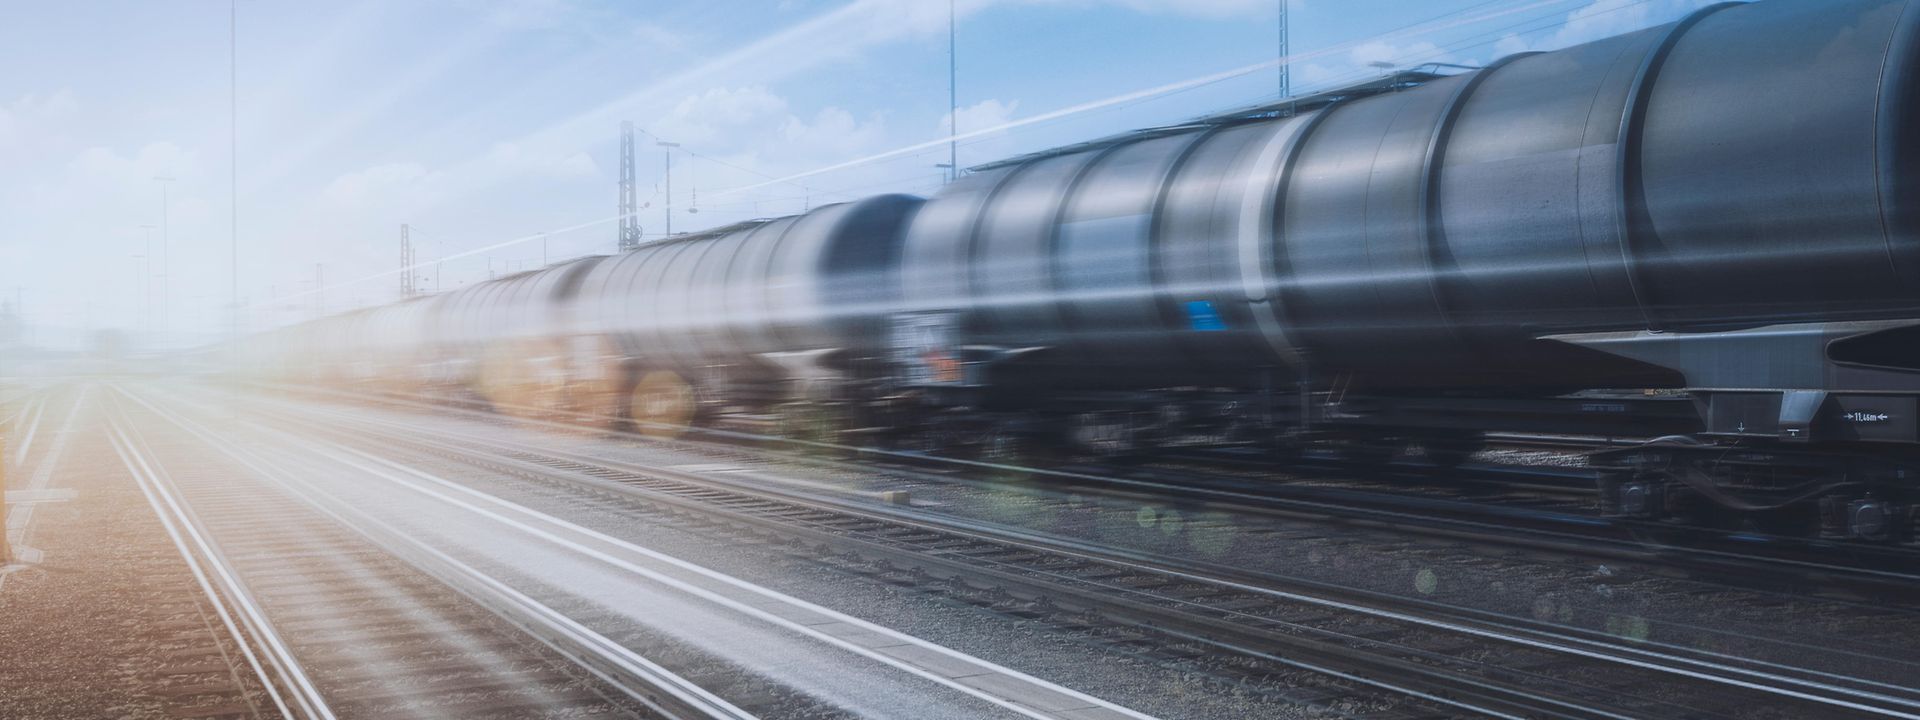 A train of tank wagons speeds past 